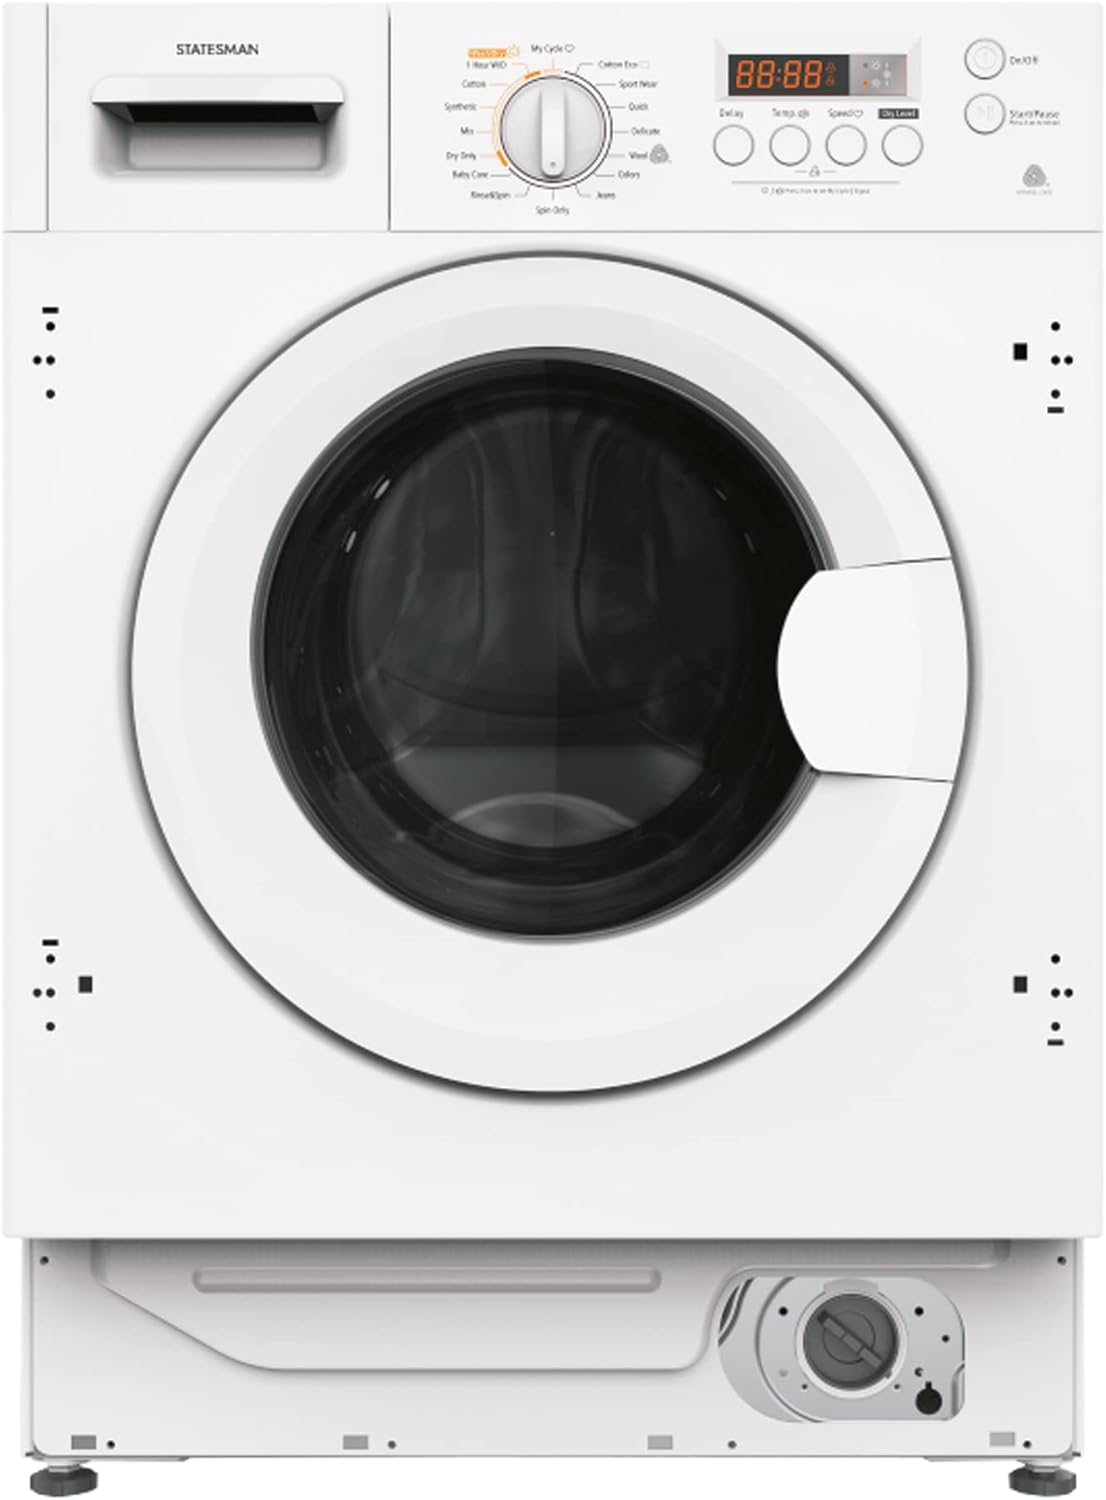 Statesman BXD0806 Integrated Washer Dryer 1400rpm, 8kg Wash Load, 6kg Dry Load, 16 Programs, 24 Hour Delay Timer, Child Lock, Sound Off, LED Display, Baby Care - Amazing Gadgets Outlet